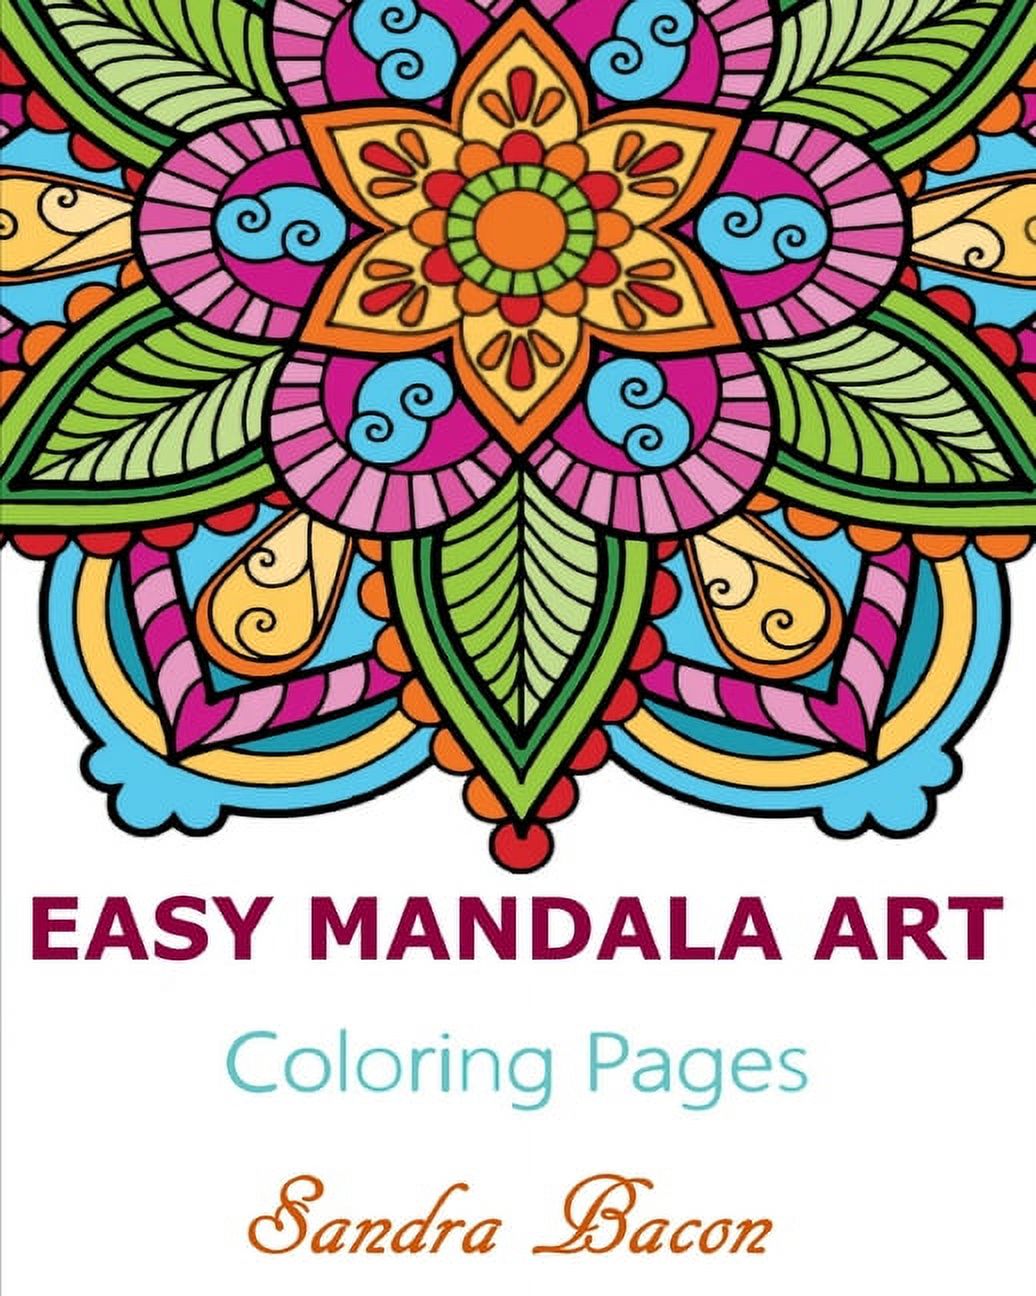 Easy Mandala Art Coloring Pages [Book]